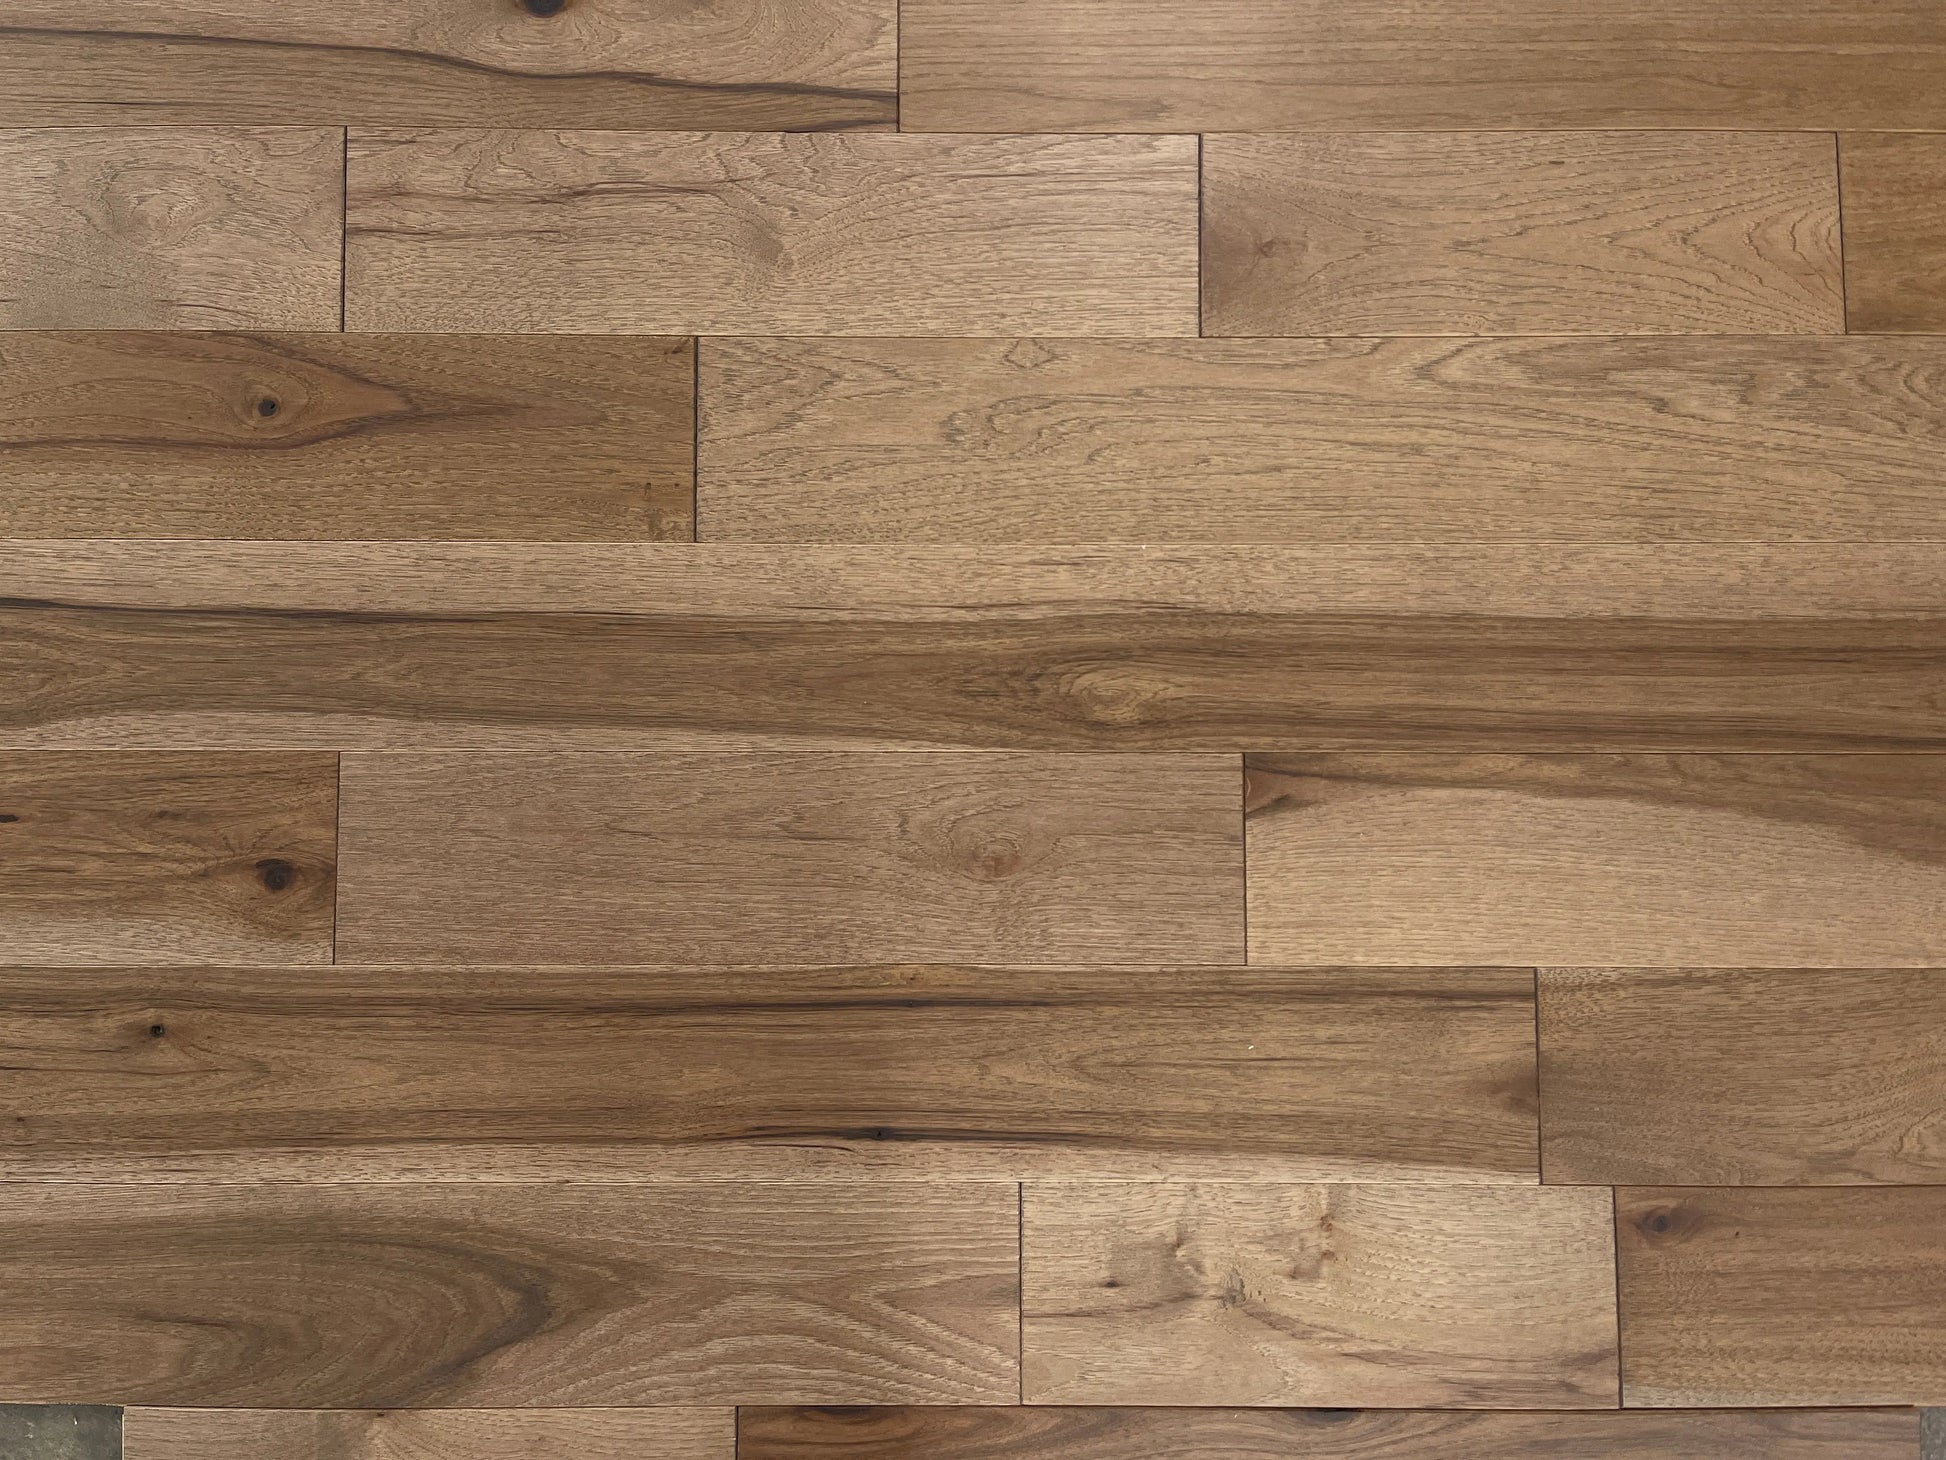 AT014 Hickory Wheat Solid or Engineered Hardwood Flooring- Call 844-356-6711 for BEST price! AT BEAS